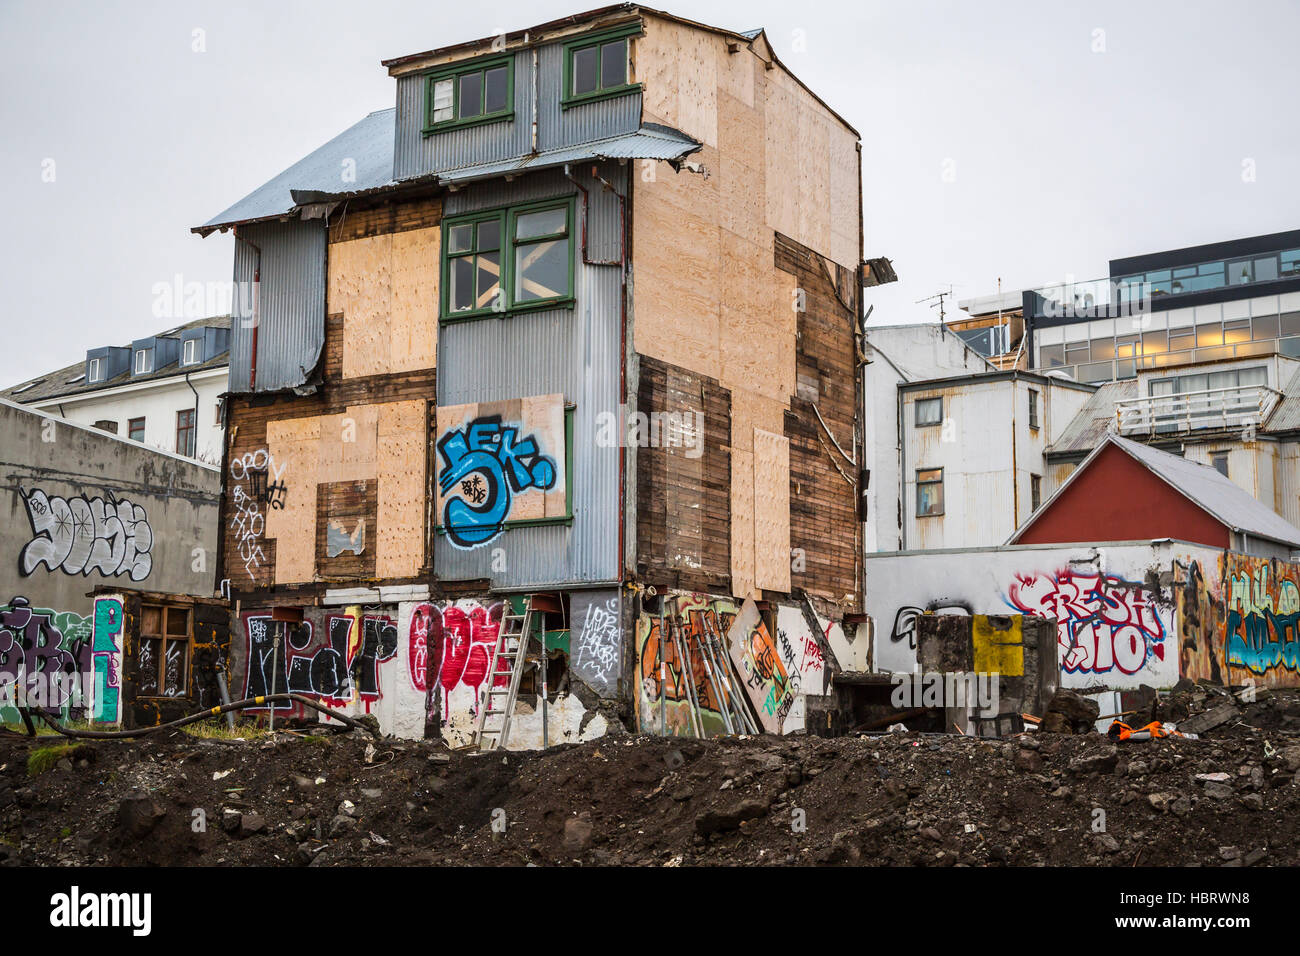 Buildings with street art graffiti in downtown Reykjavik, Iceland, Europe. Stock Photo